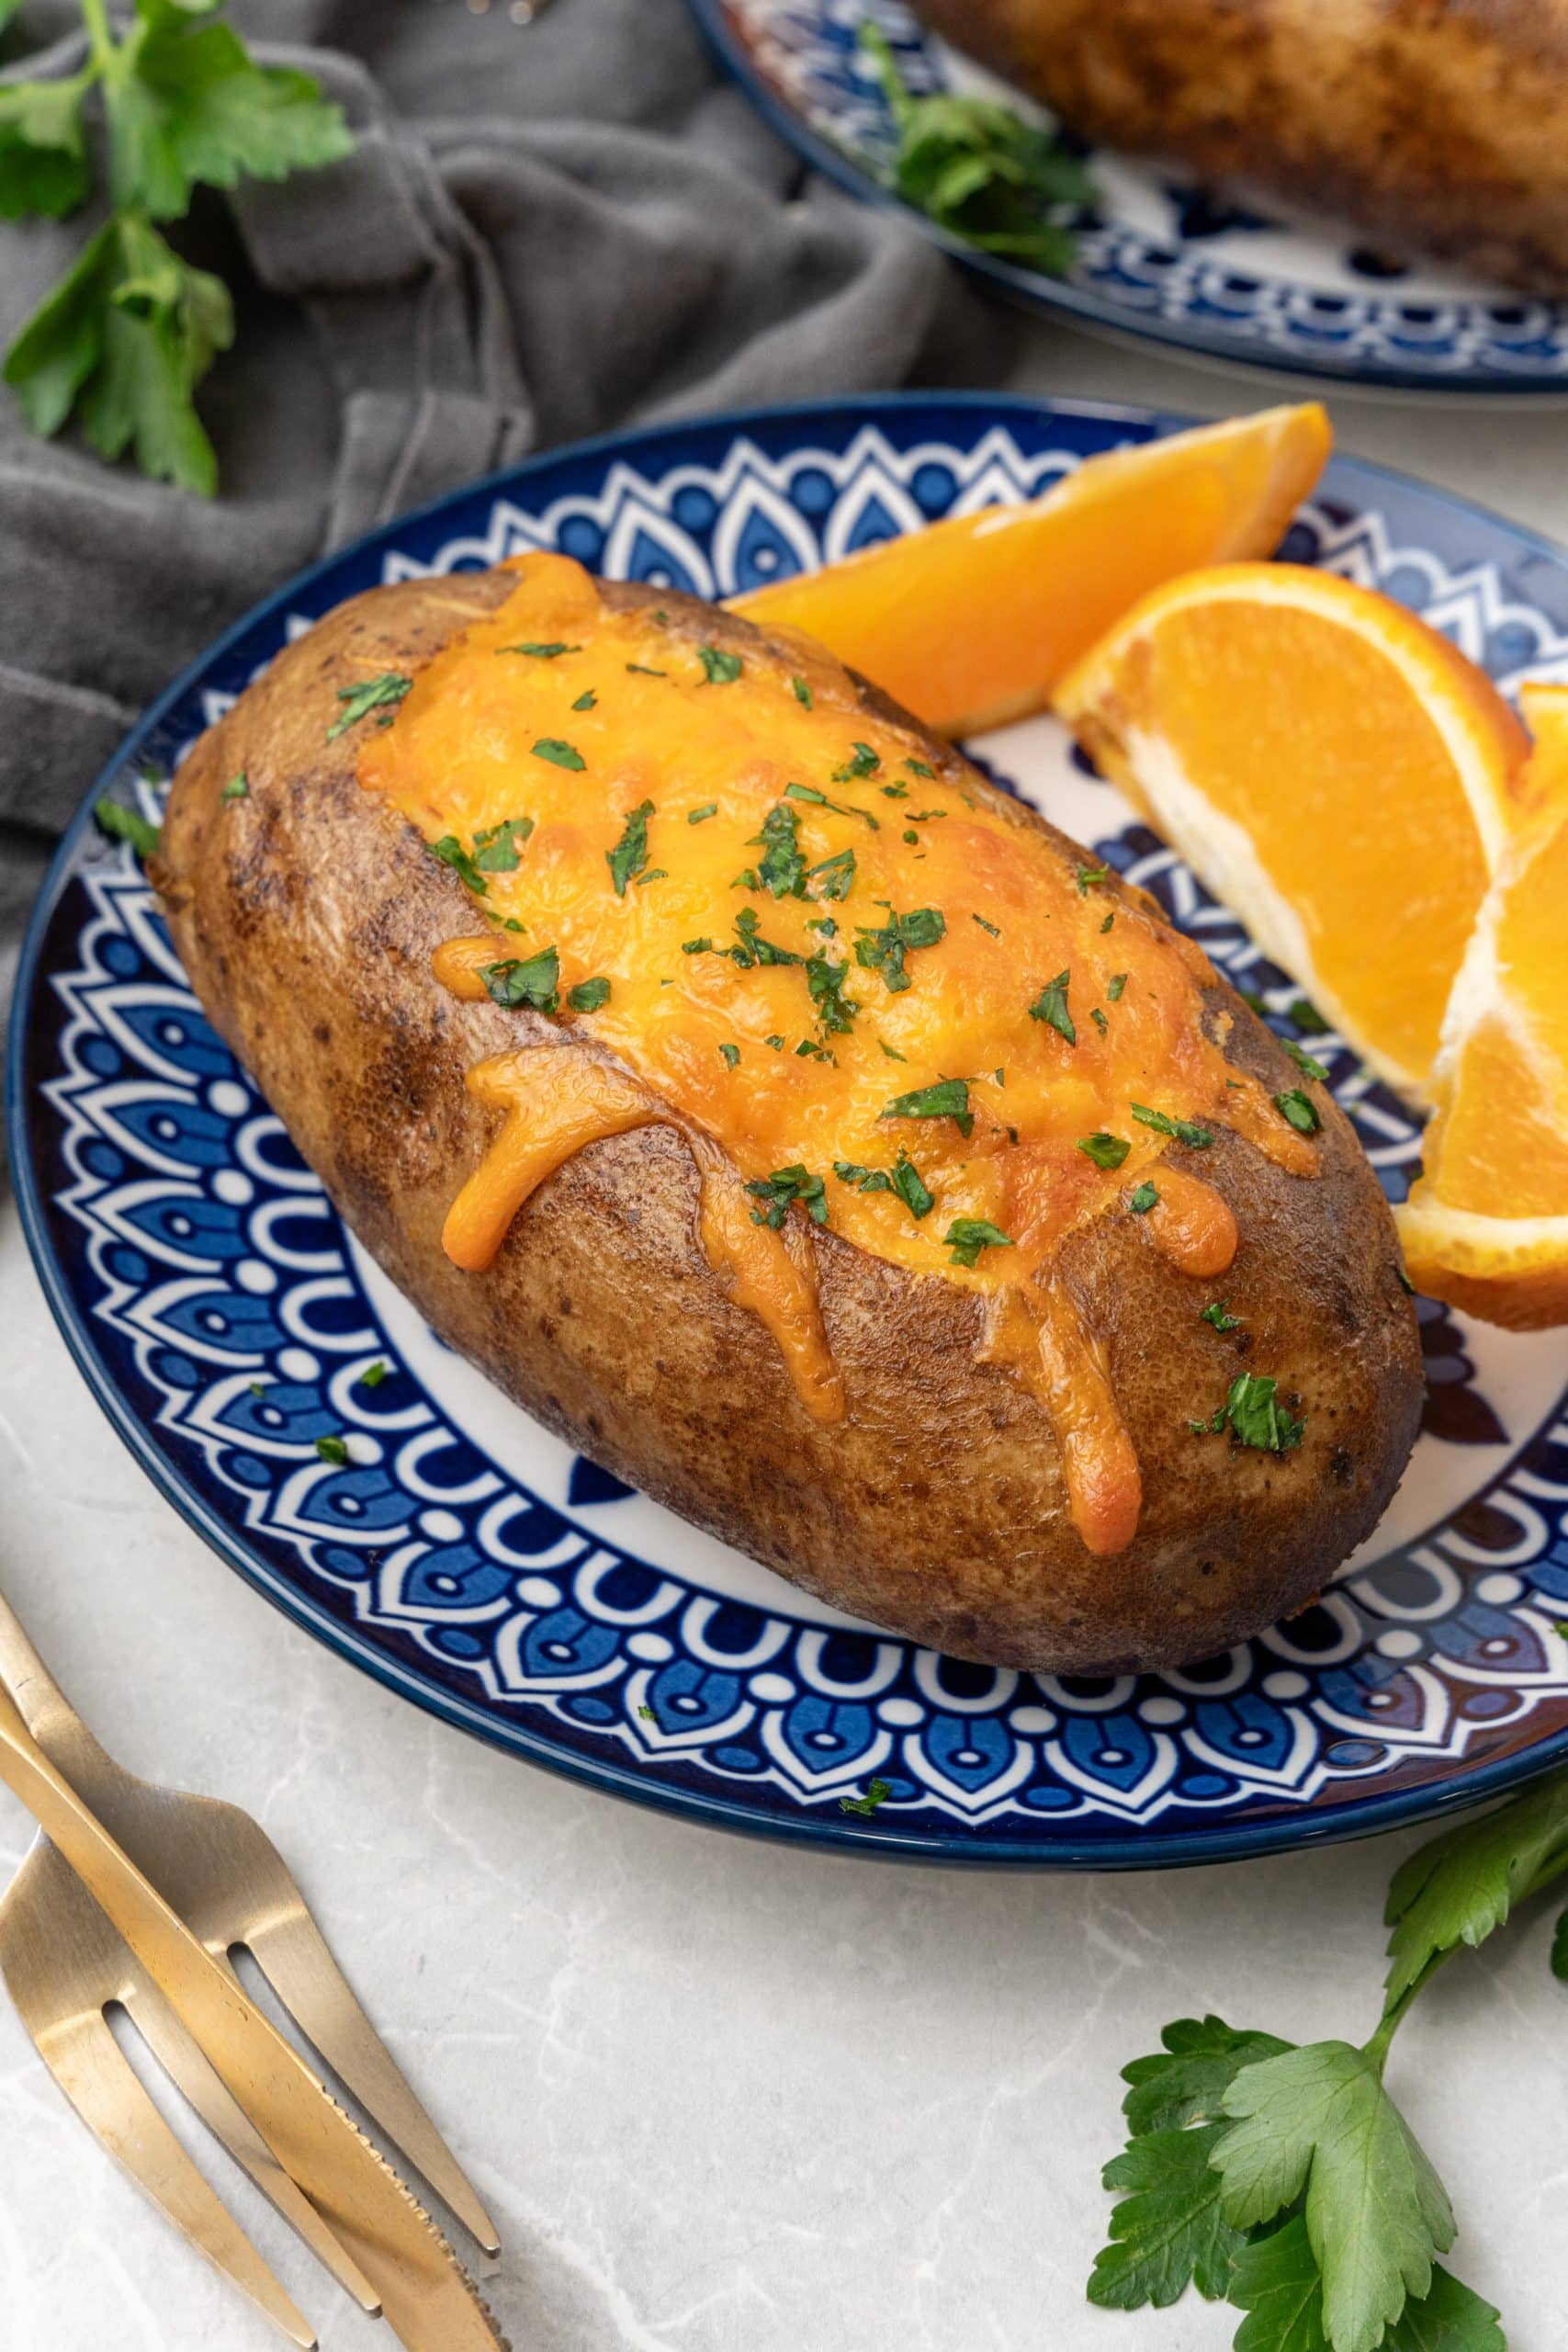 a twice baked breakfast potatoes on a blue and white plate with orange slices on the side